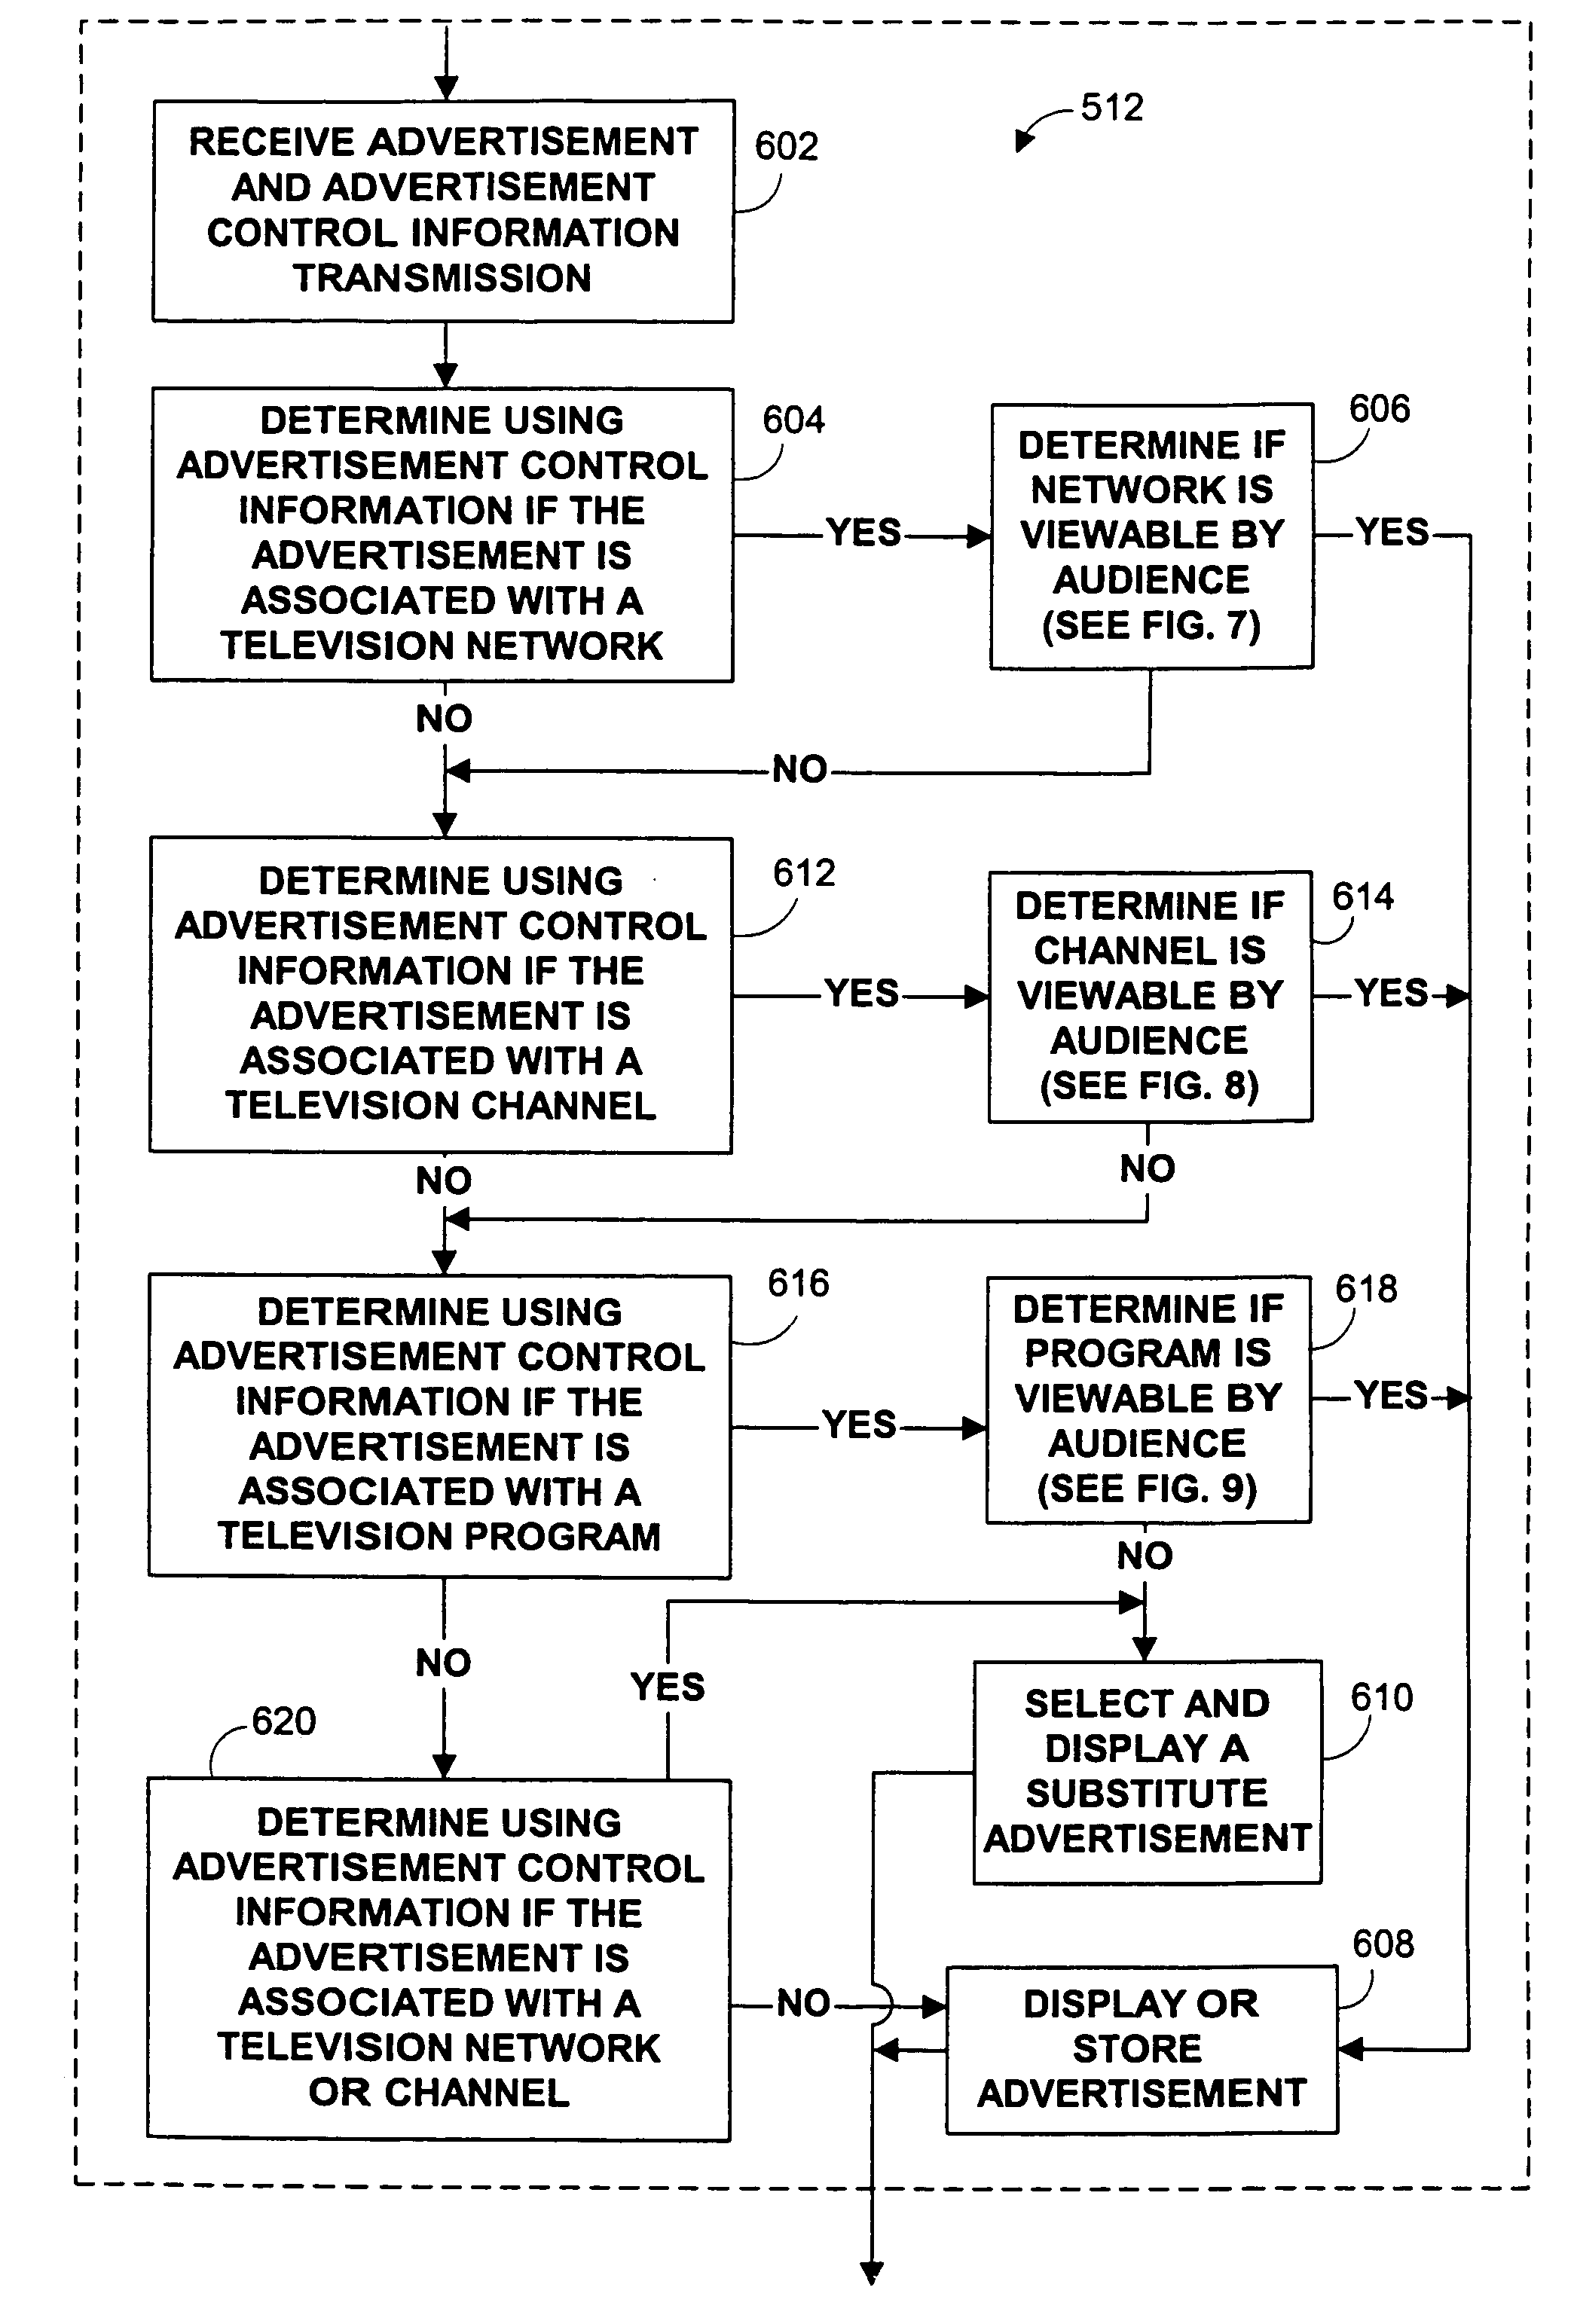 Systems and methods for advertising television networks, channels, and programs